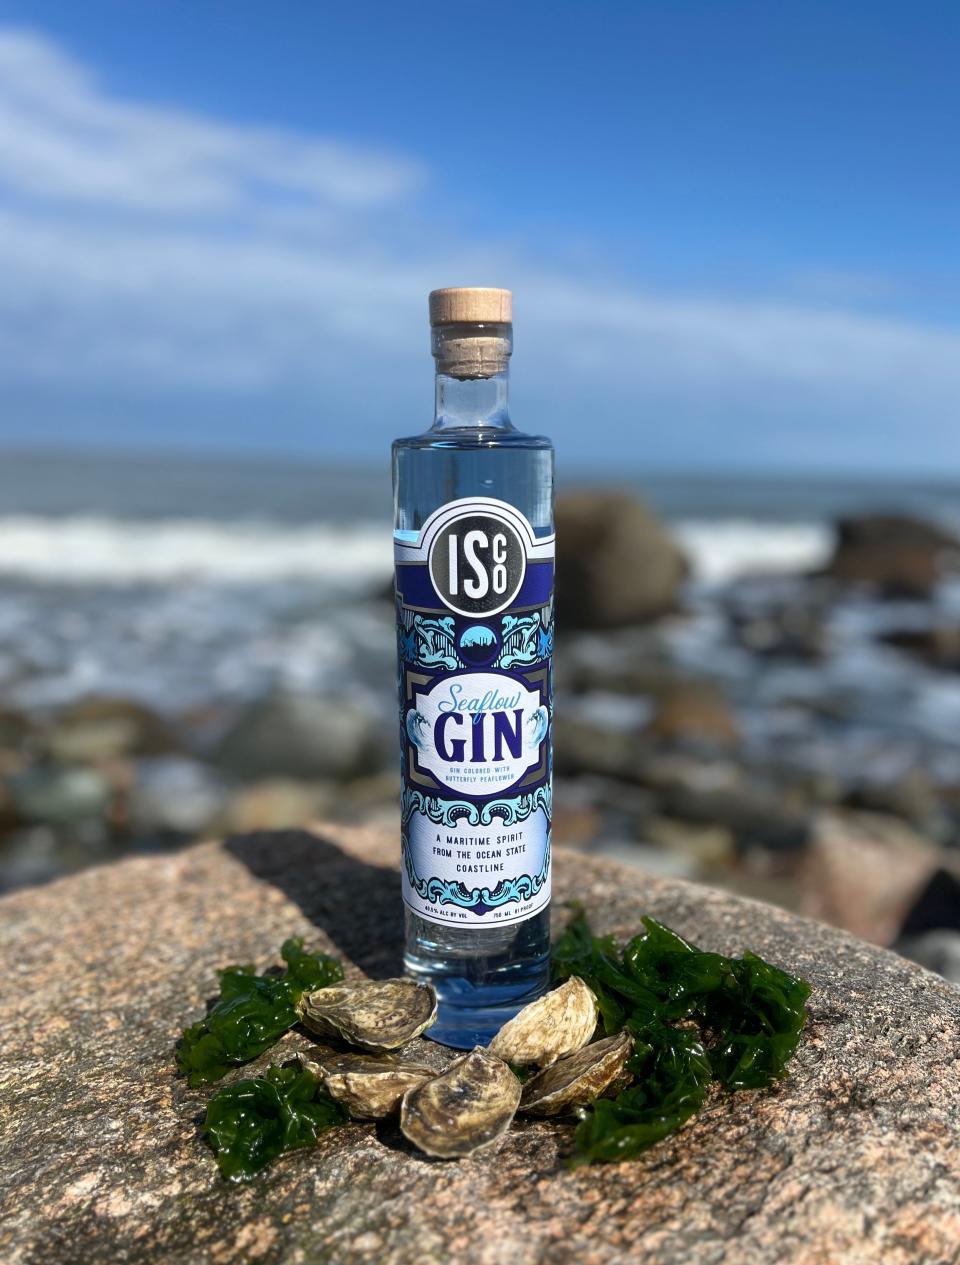 Seaflow is a maritime-inspired gin made with local oysters and seaweed. It comes from Providence distiller ISCO and is naturally ocean blue in hue.